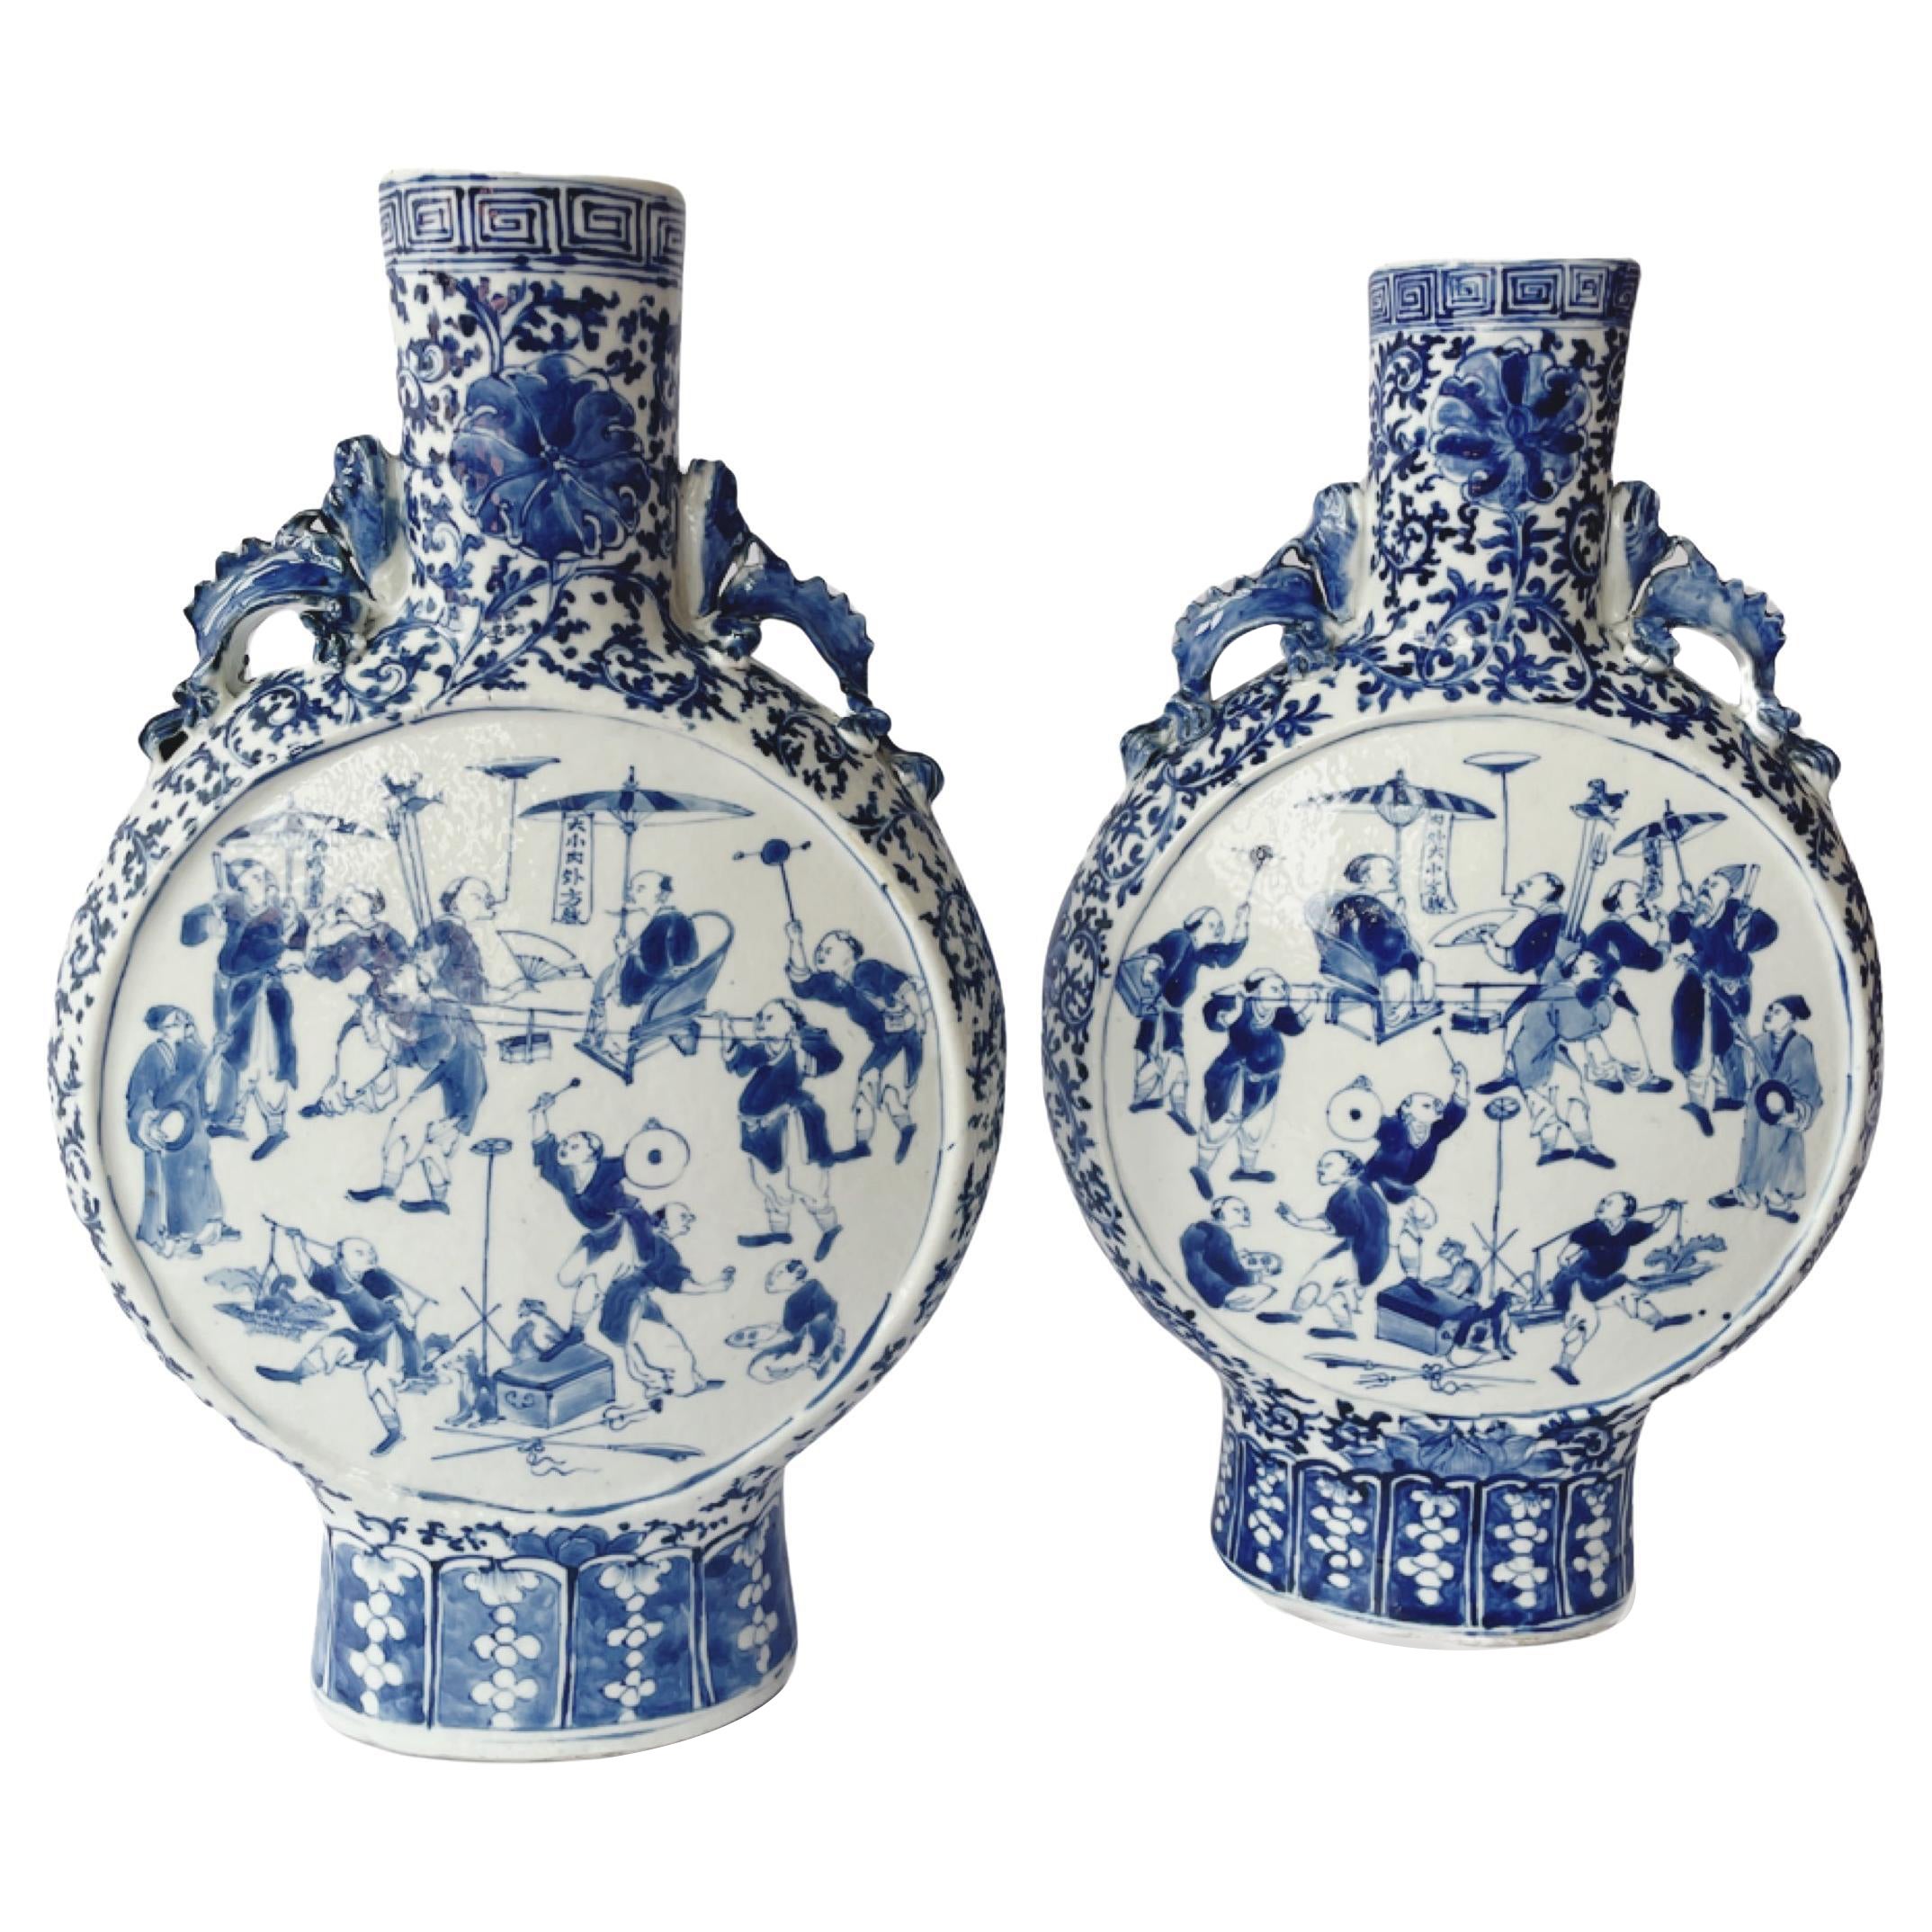 Pair of Moon-Shaped Vases, China Late 19th Century